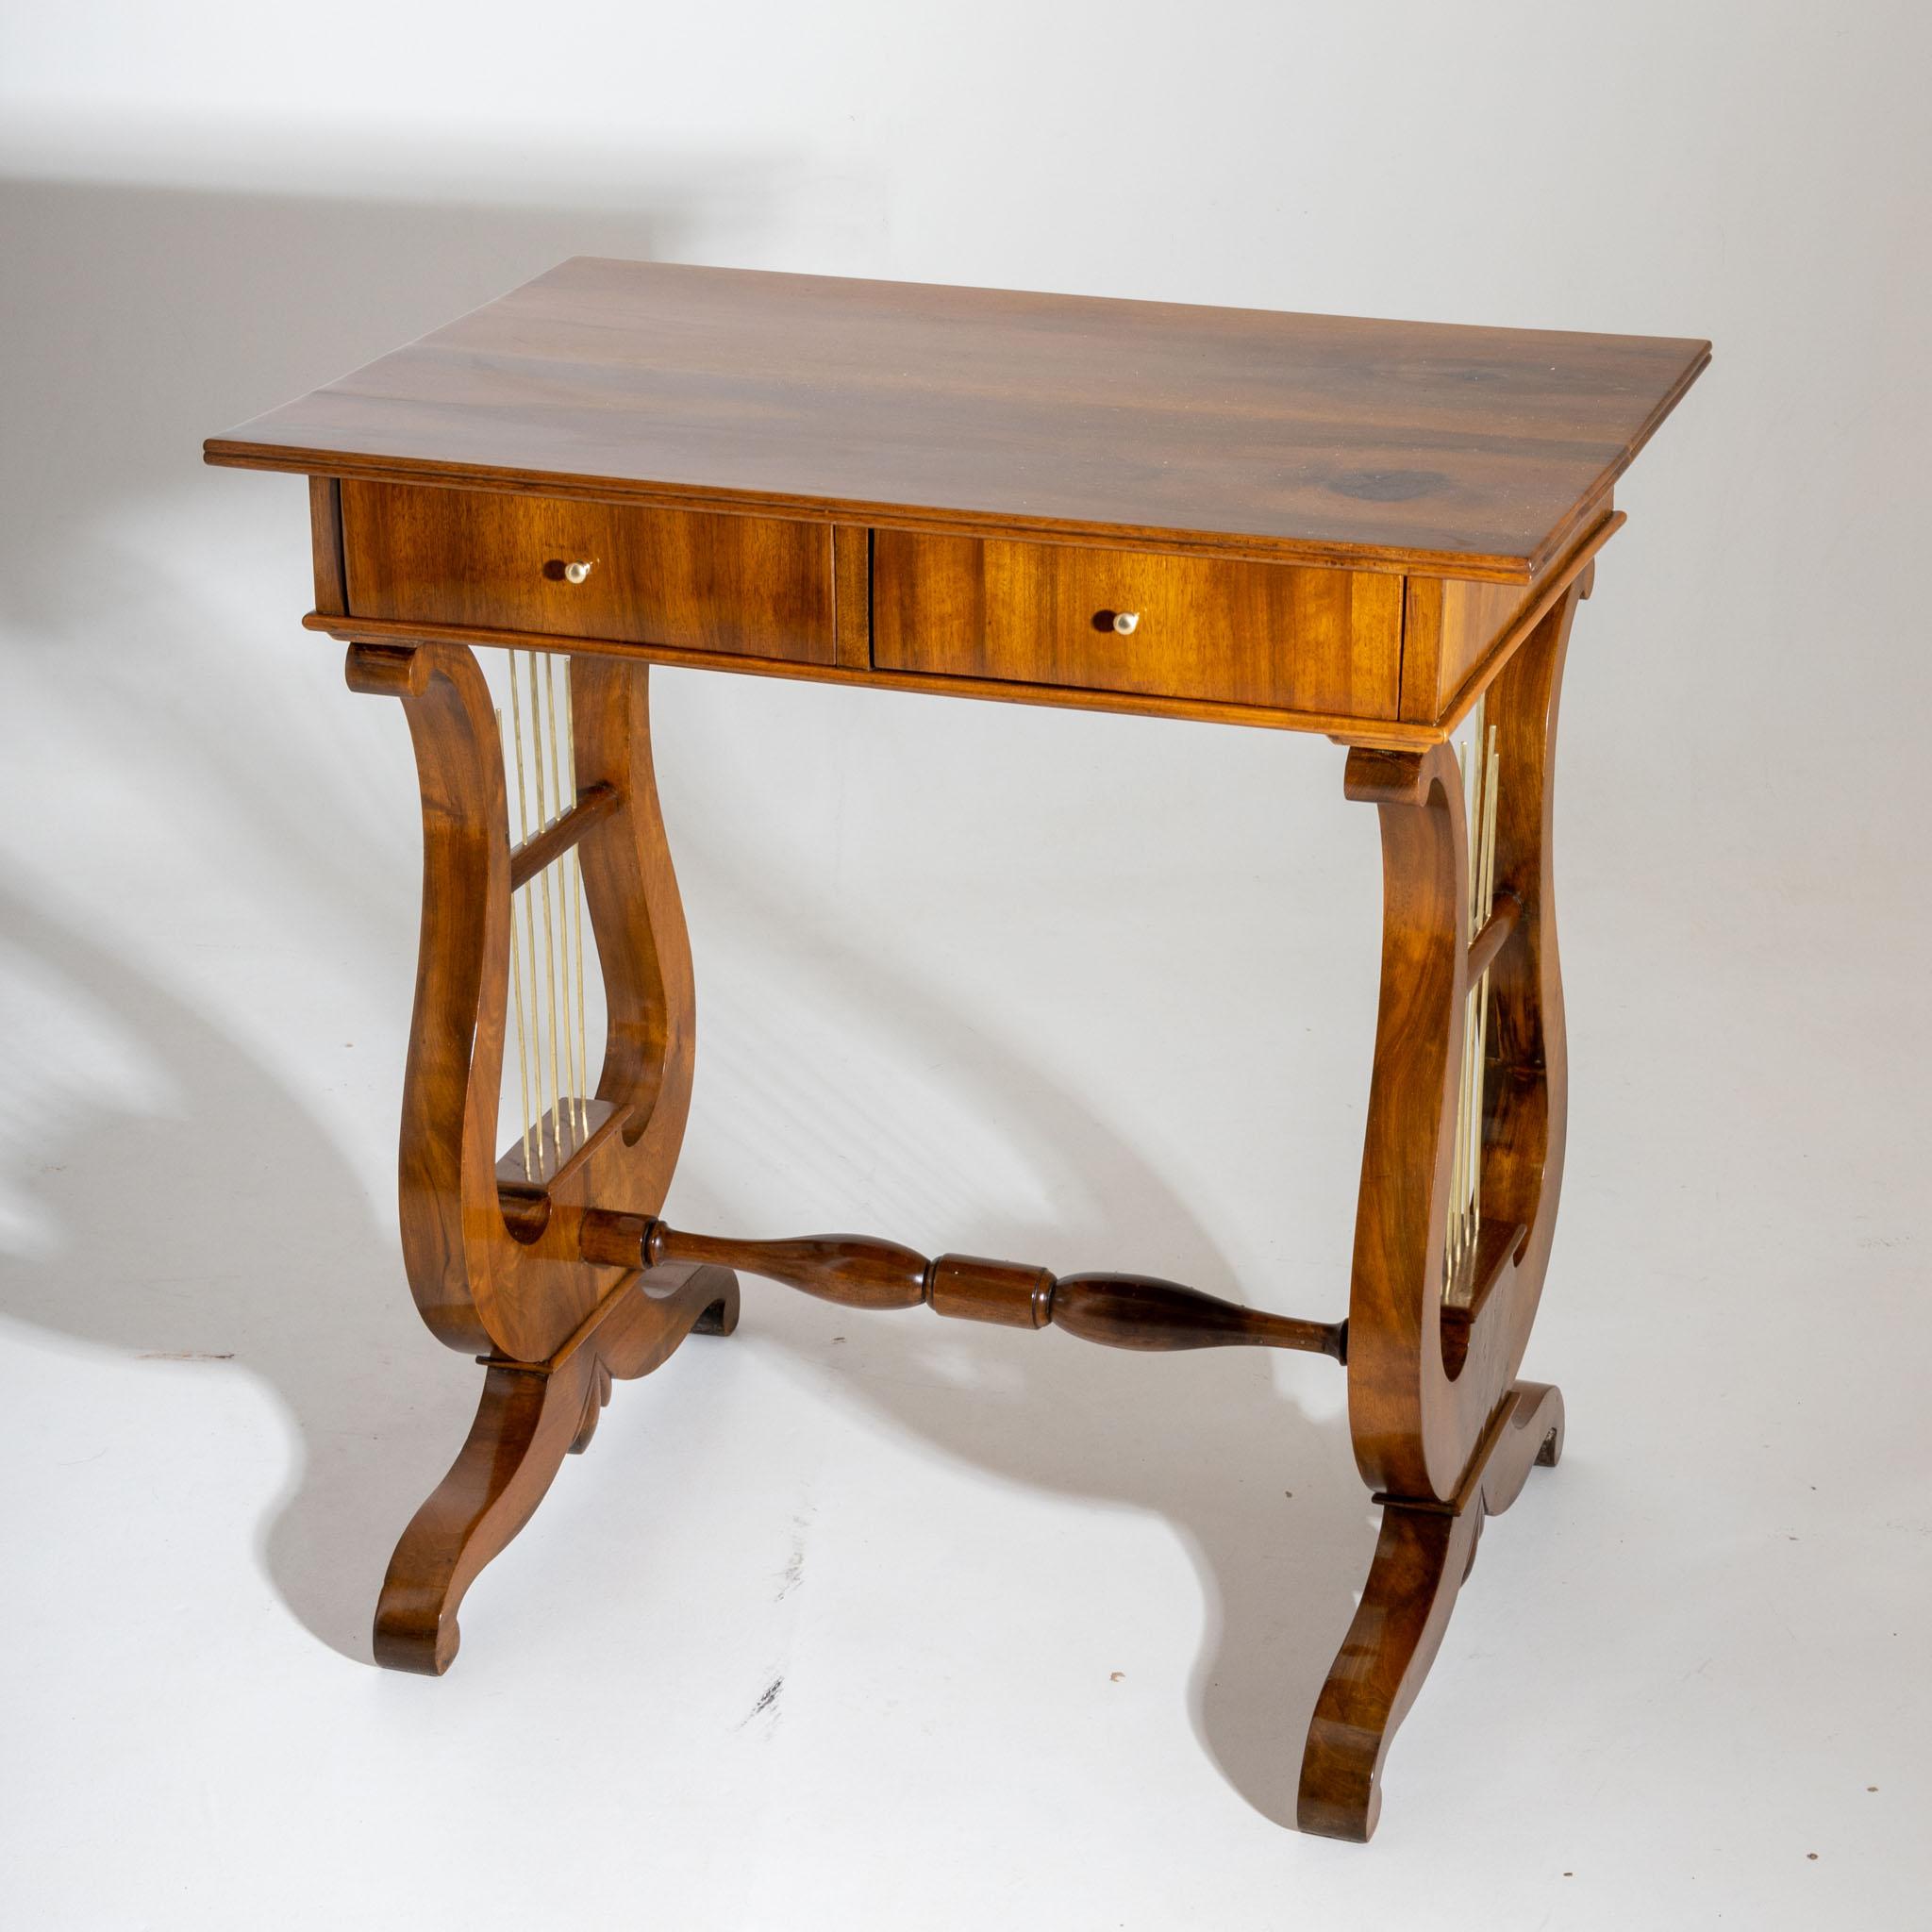 Biedermeier work table with lyre-shaped frame and four drawers. The table is veneered in walnut and hand polished.